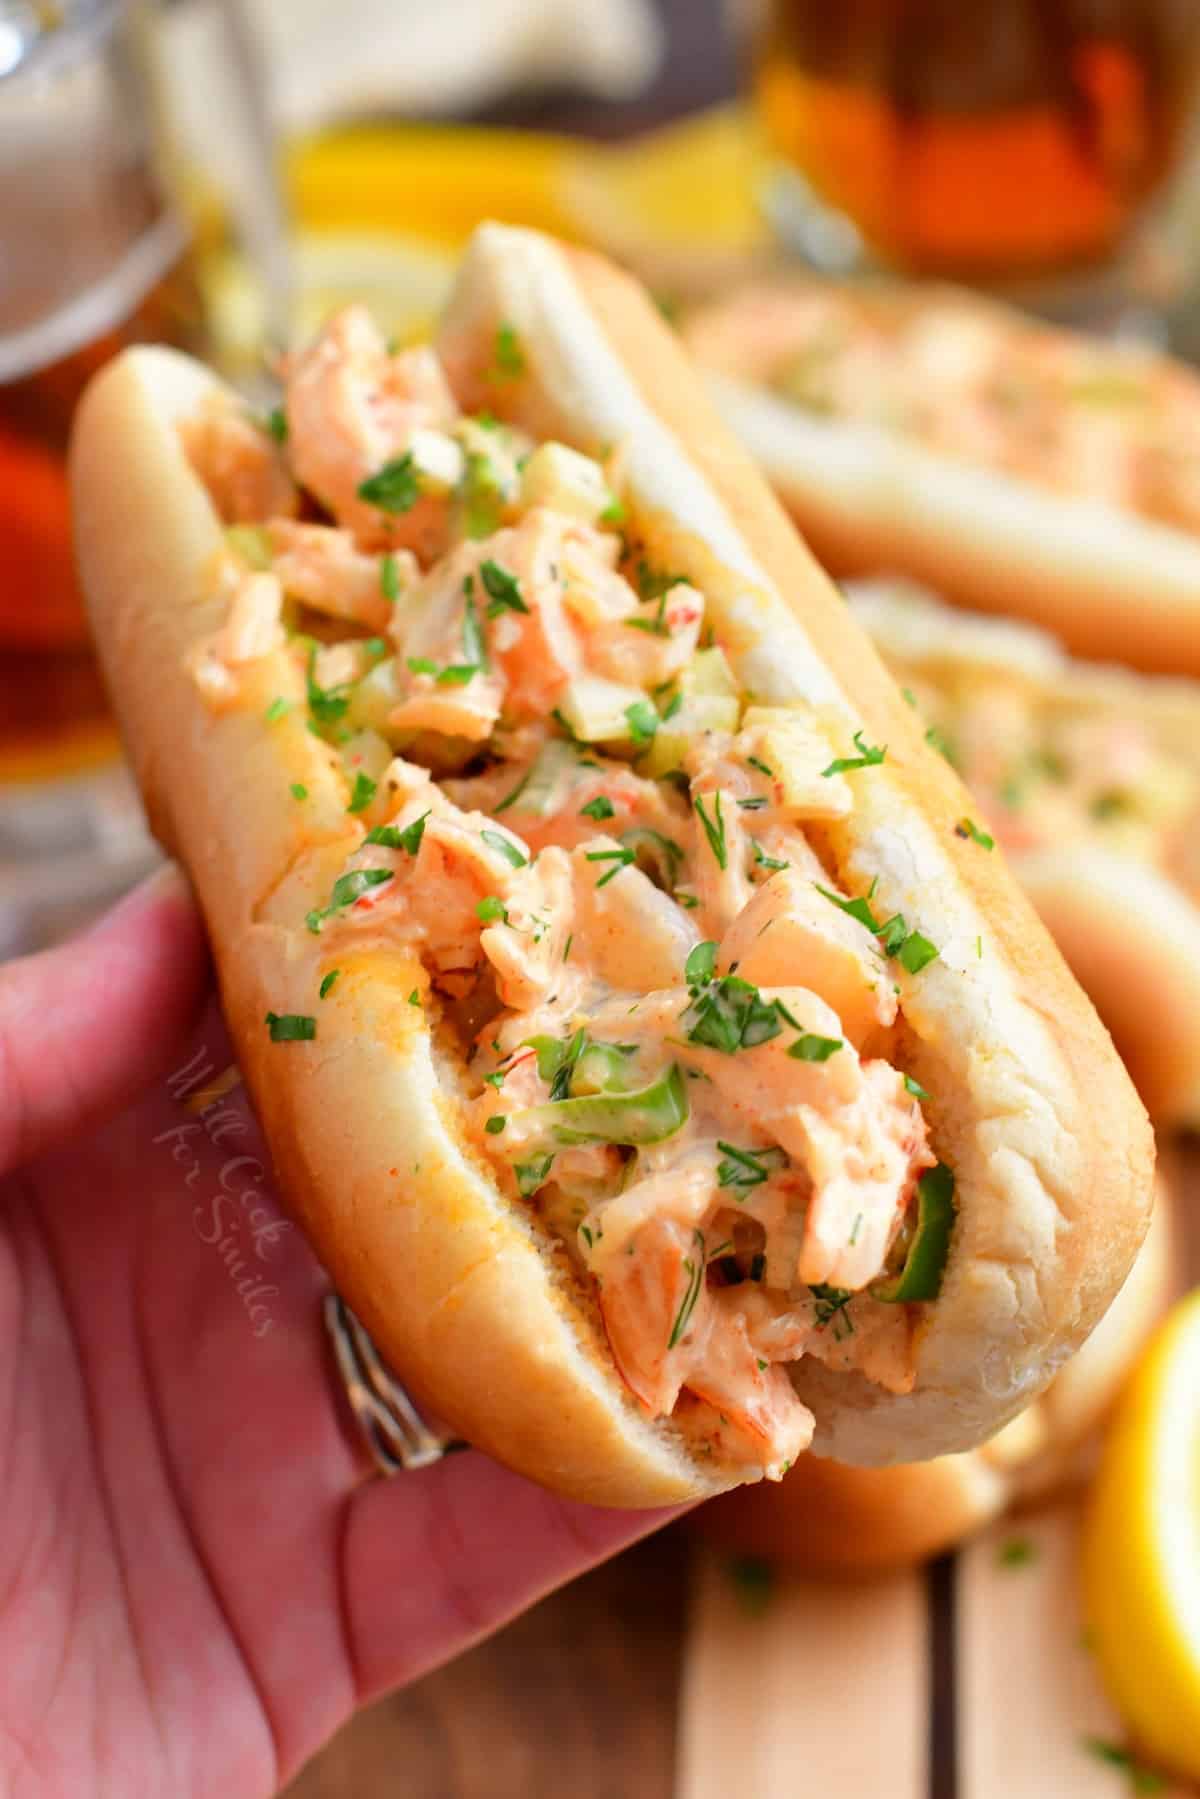 A shrimp roll is held in a hand. 